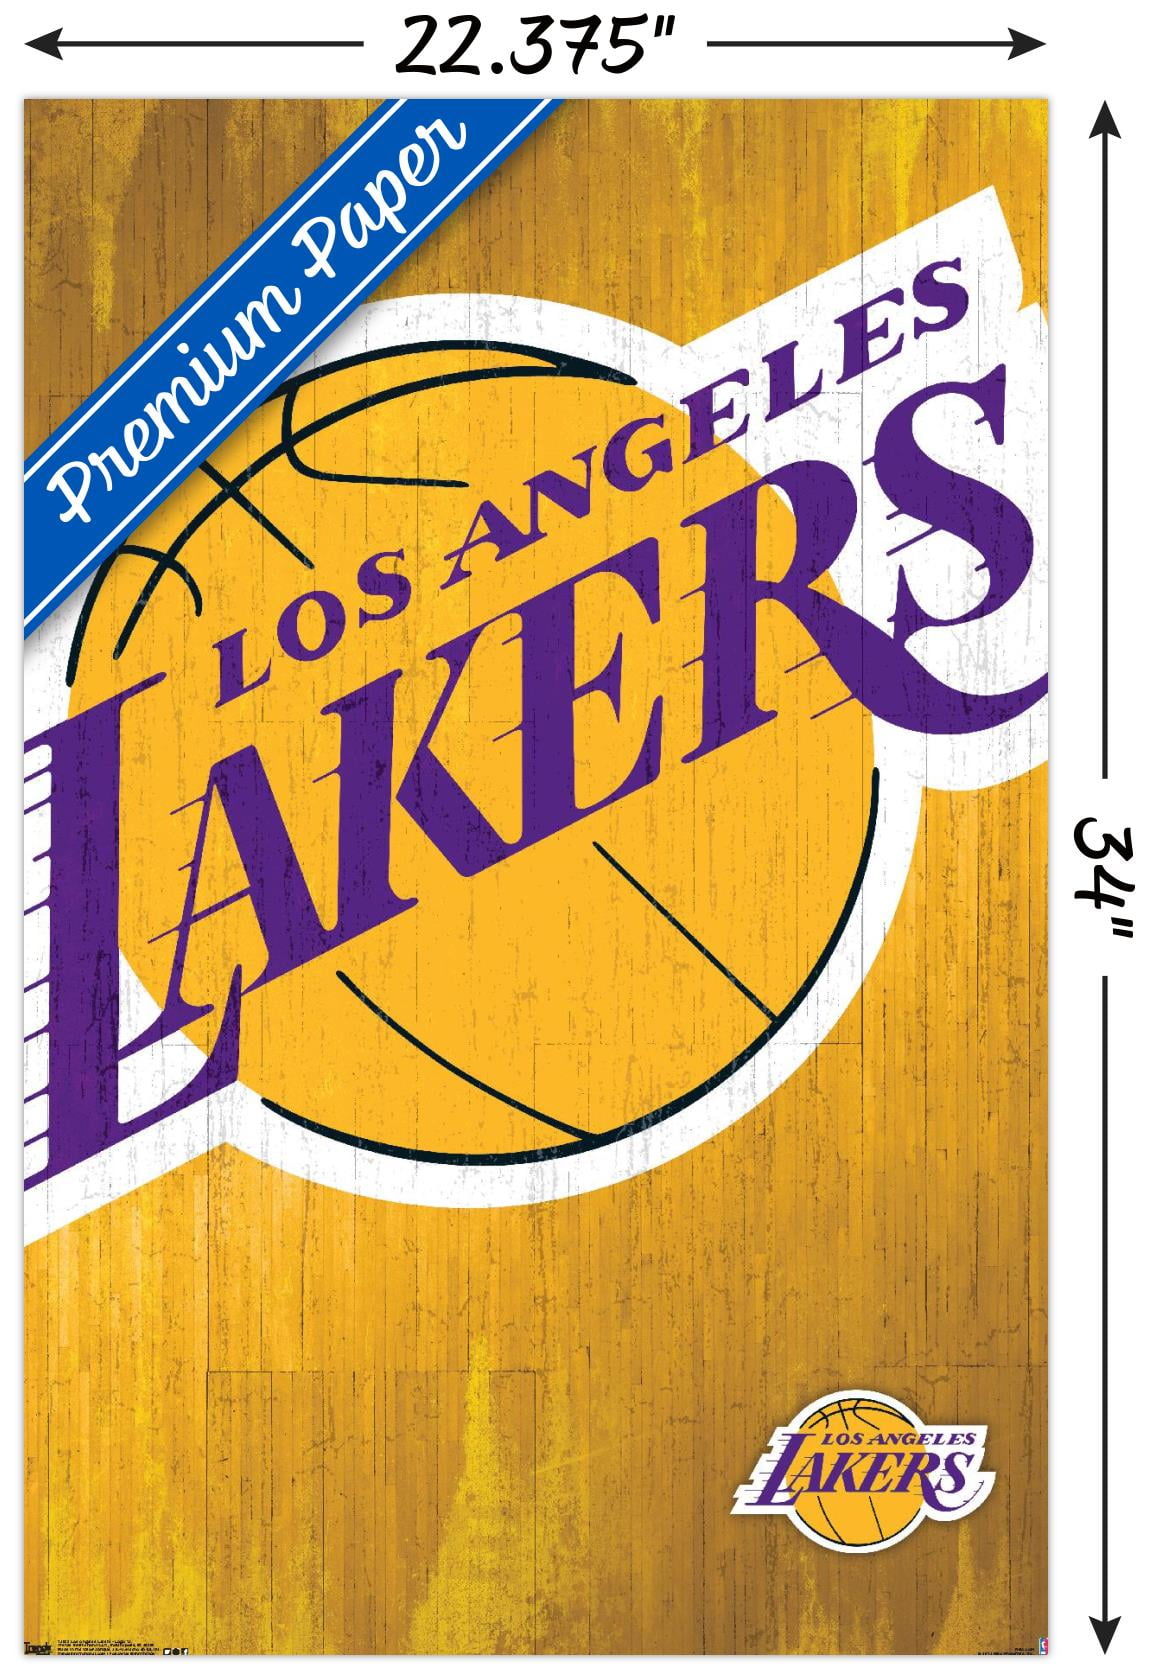 Los Angeles Lakers Custom Shop, Customized Lakers Apparel, Personalized  Lakers Gear